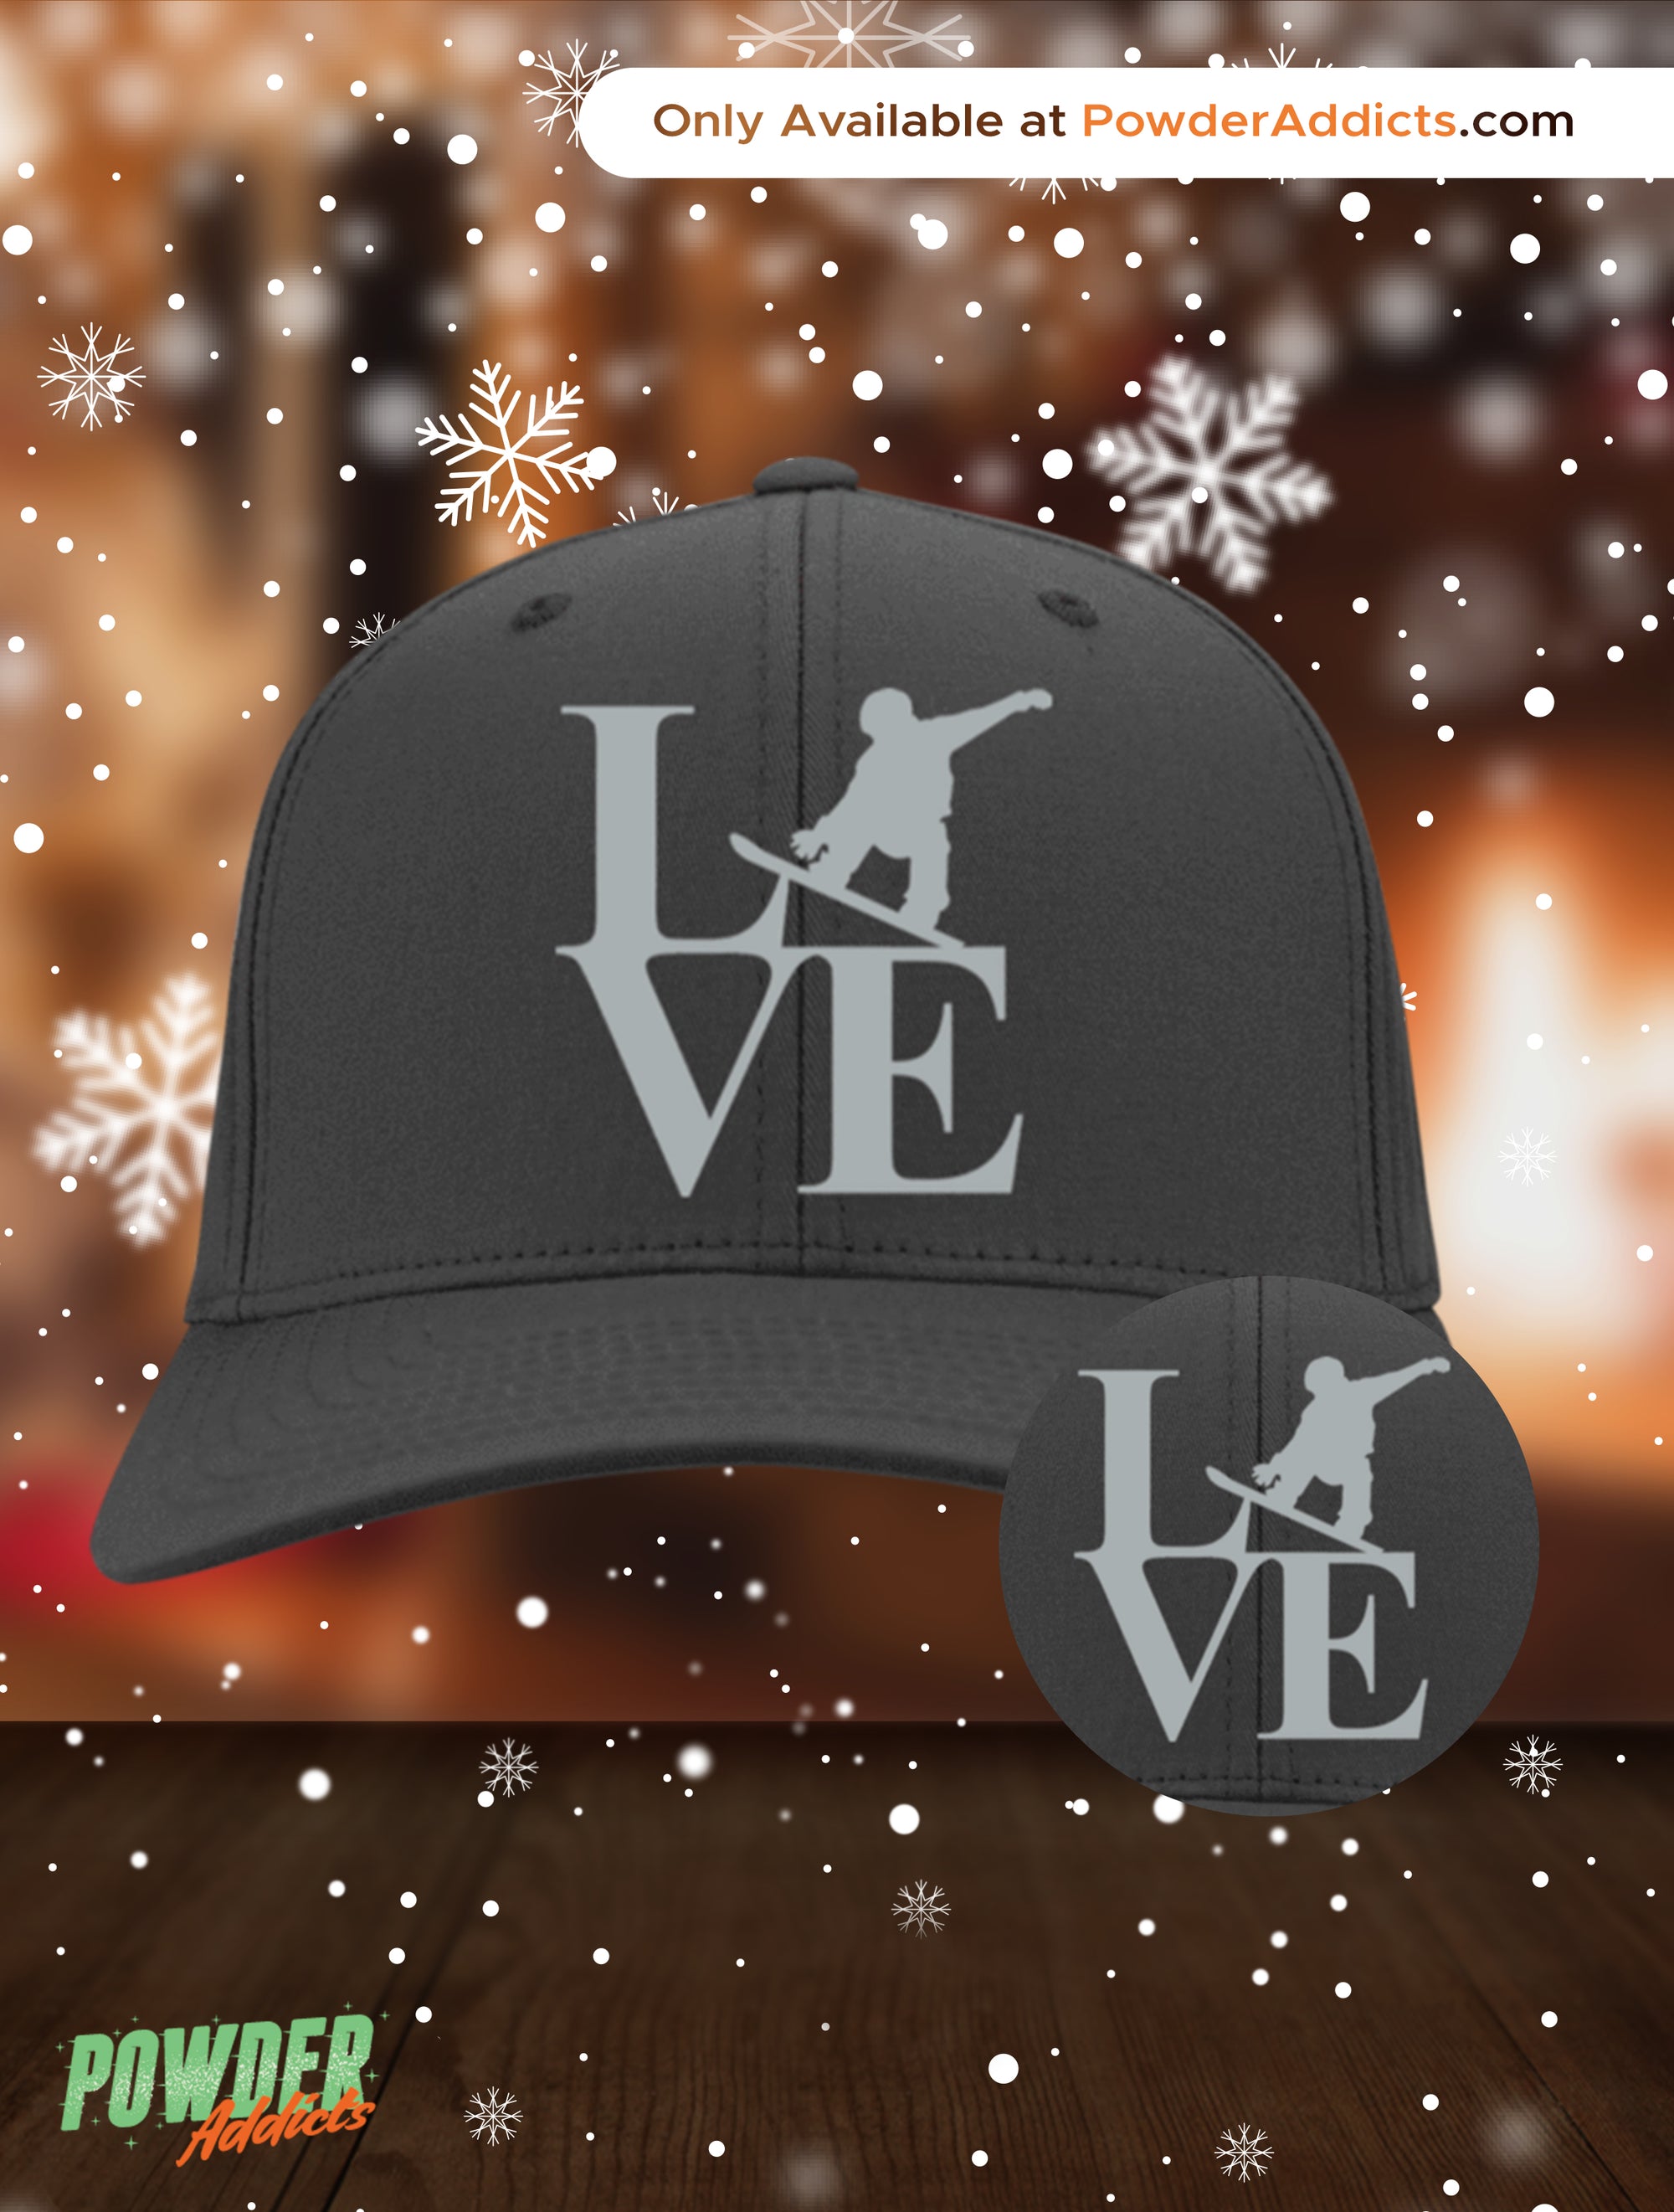 Love Snowboard Embroidered Silver Caps and Beanies - Powderaddicts